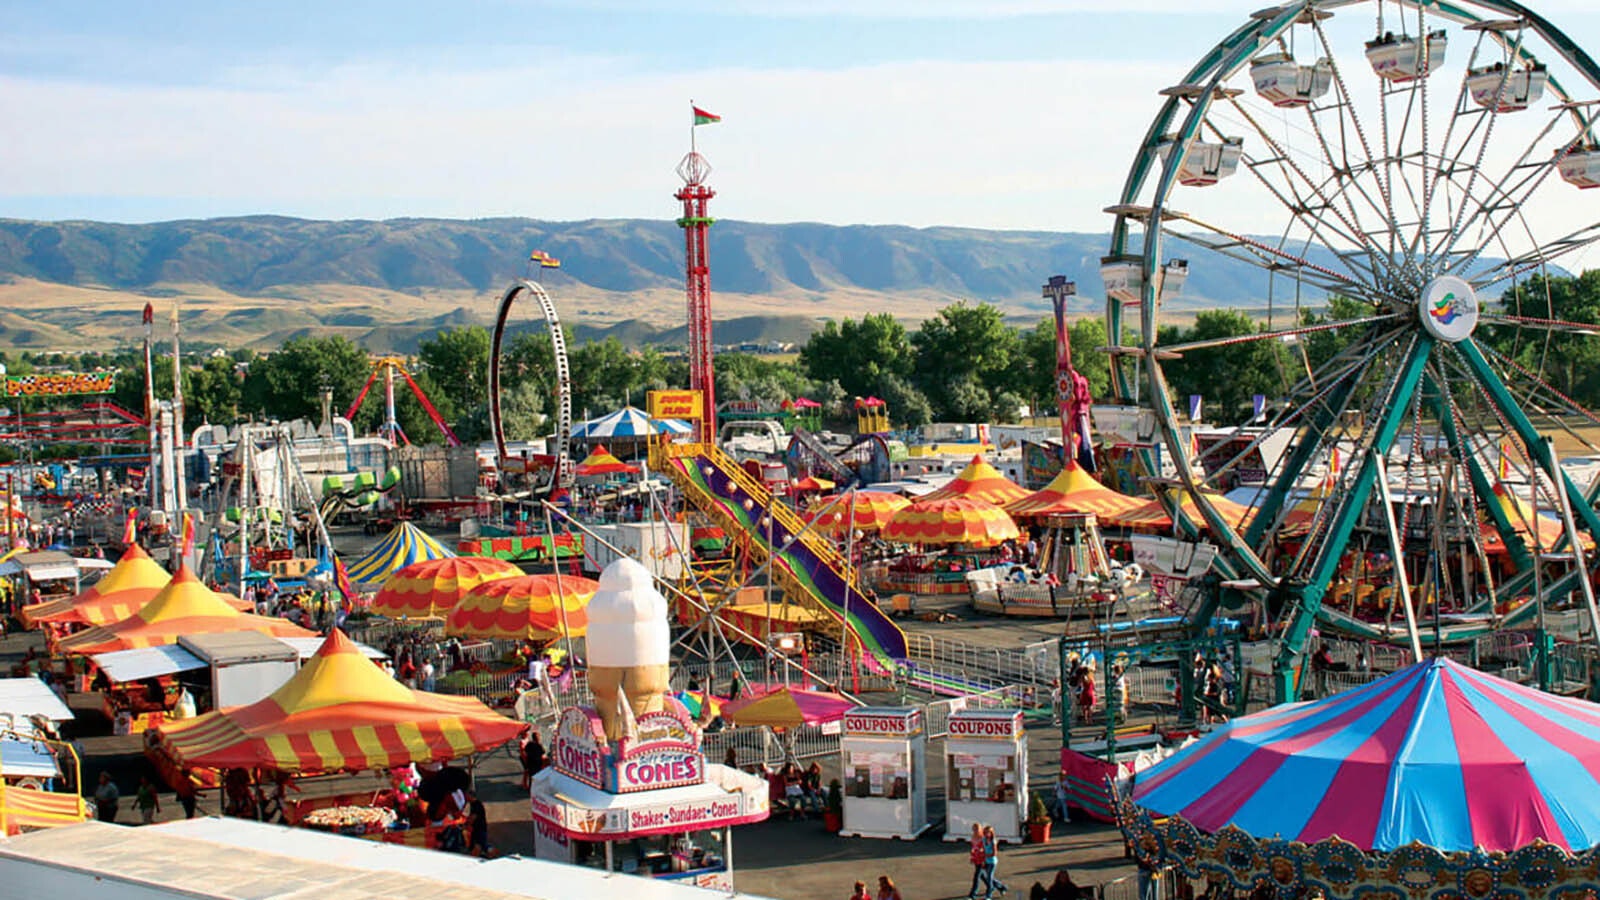 The Central Wyoming Fair and Rodeo in Casper.